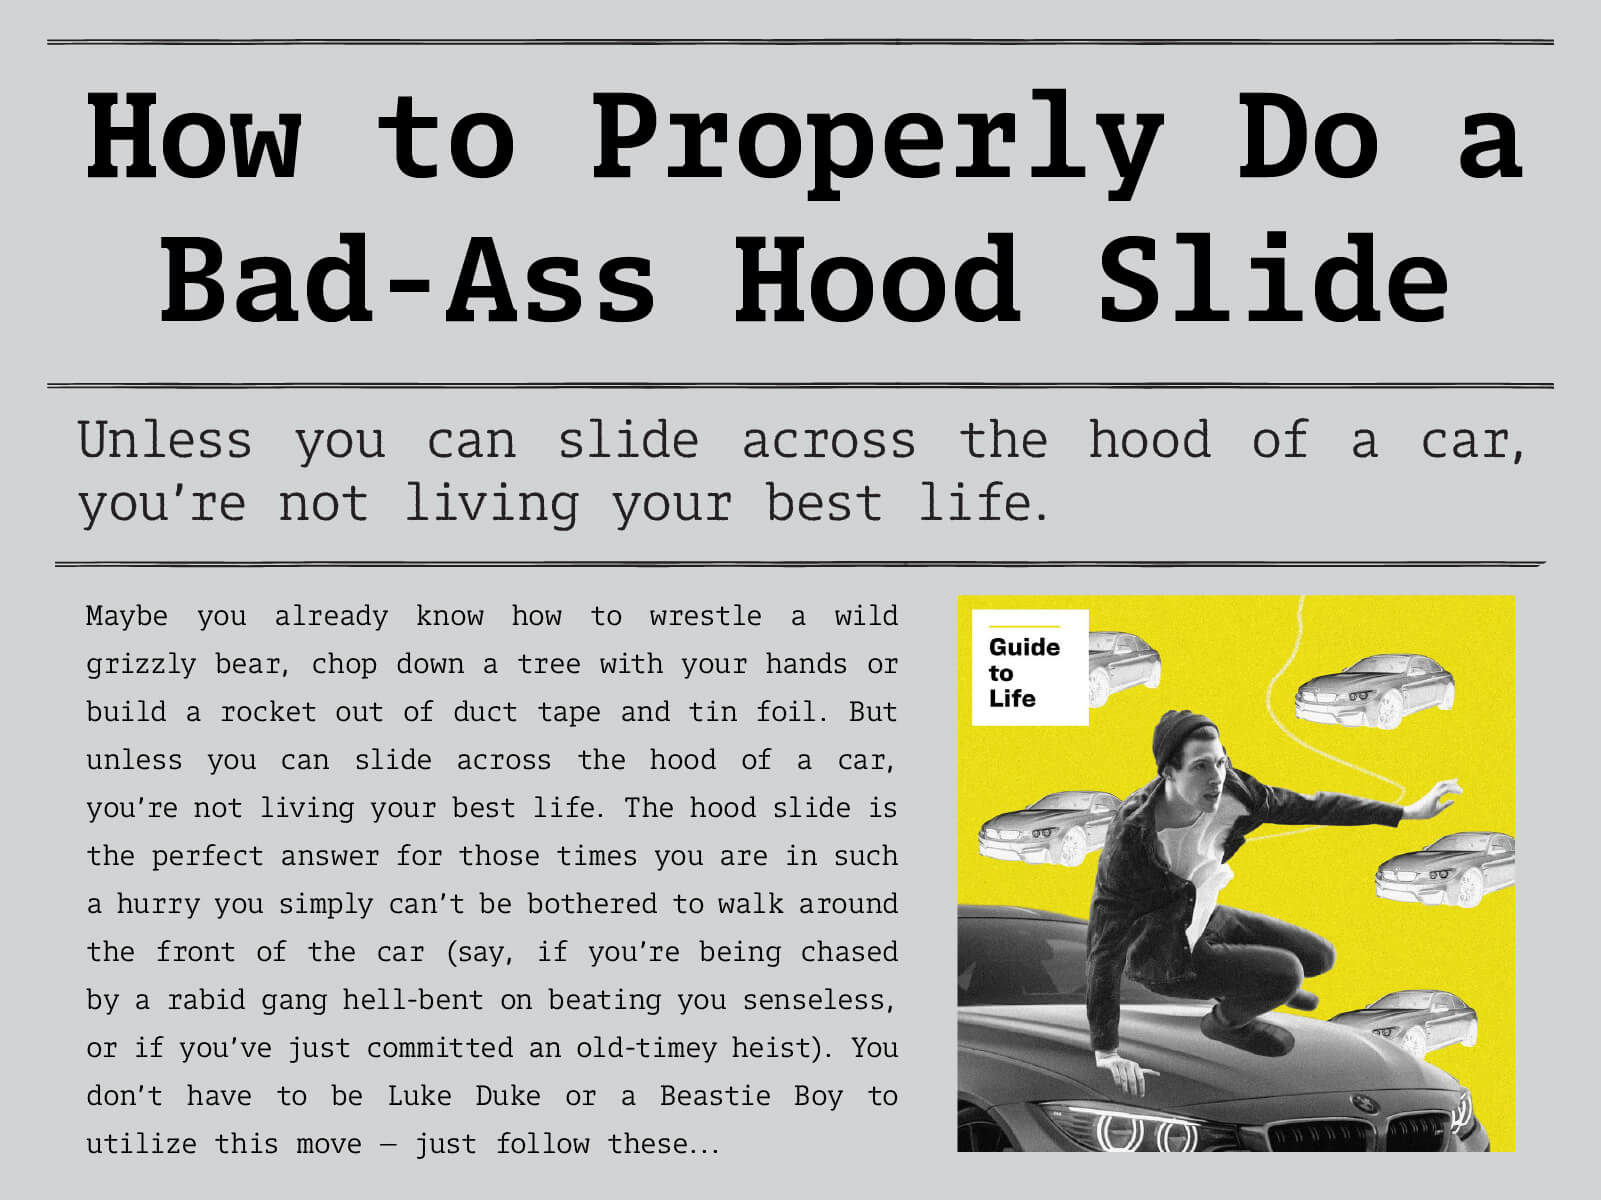 How to Properly Do a Bad-Ass Hood Slide. Unless you can slide across the hood of a car, you're not living your best life. Click to read more.